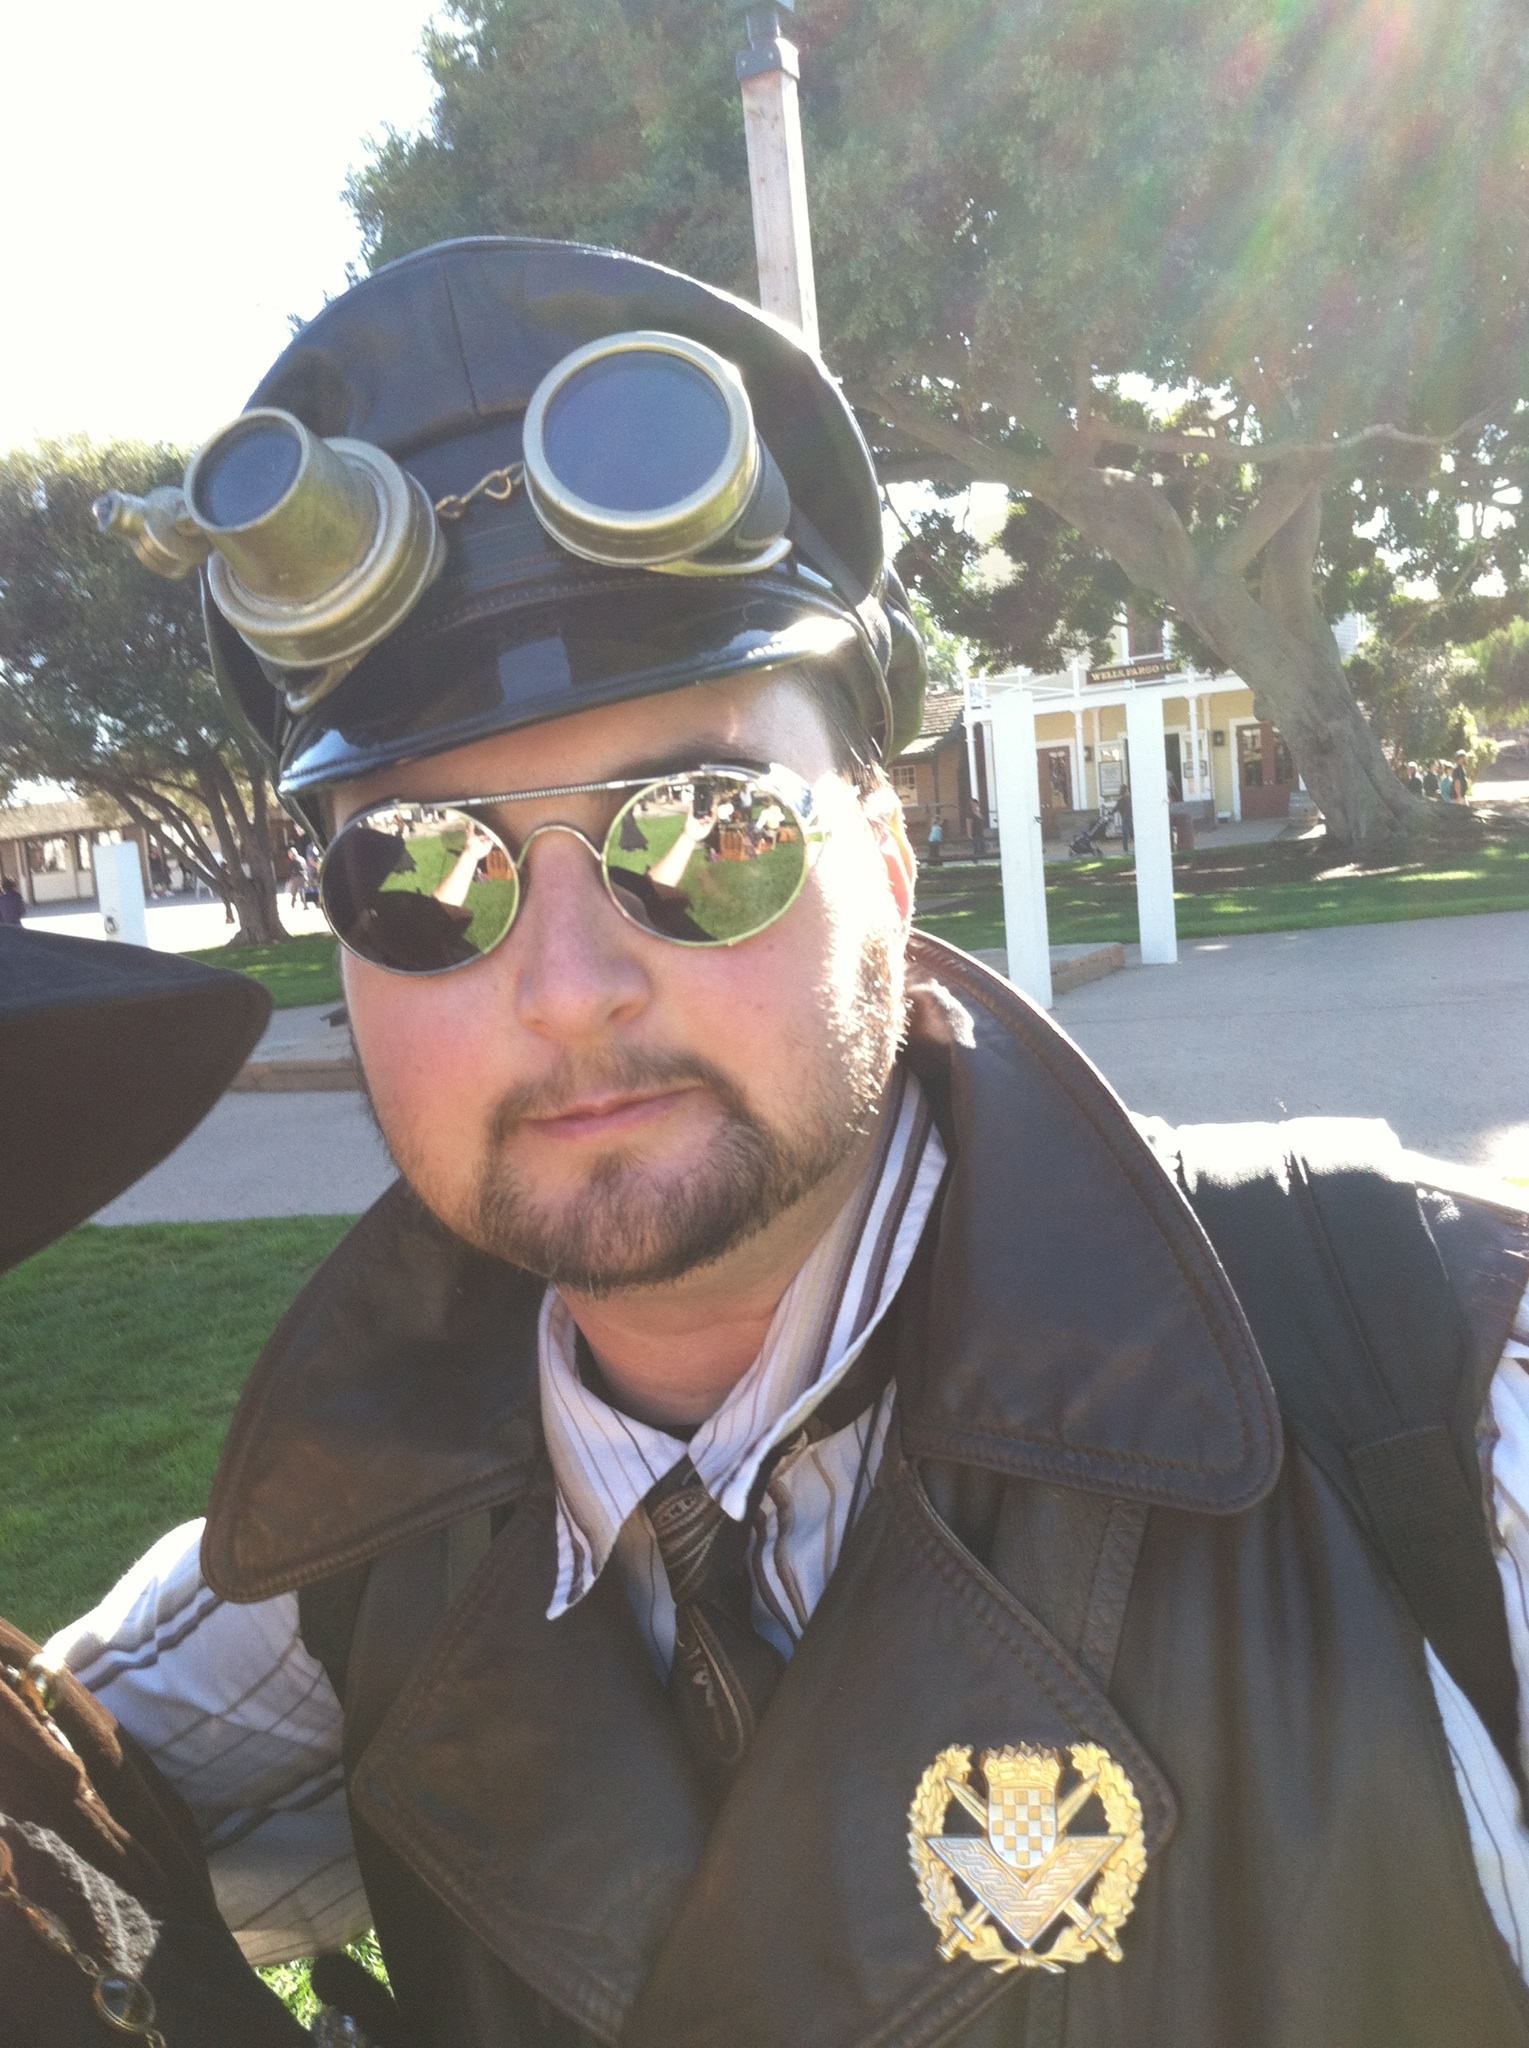 Valiant dressed Steampunk for Old Town San Diego 2014.